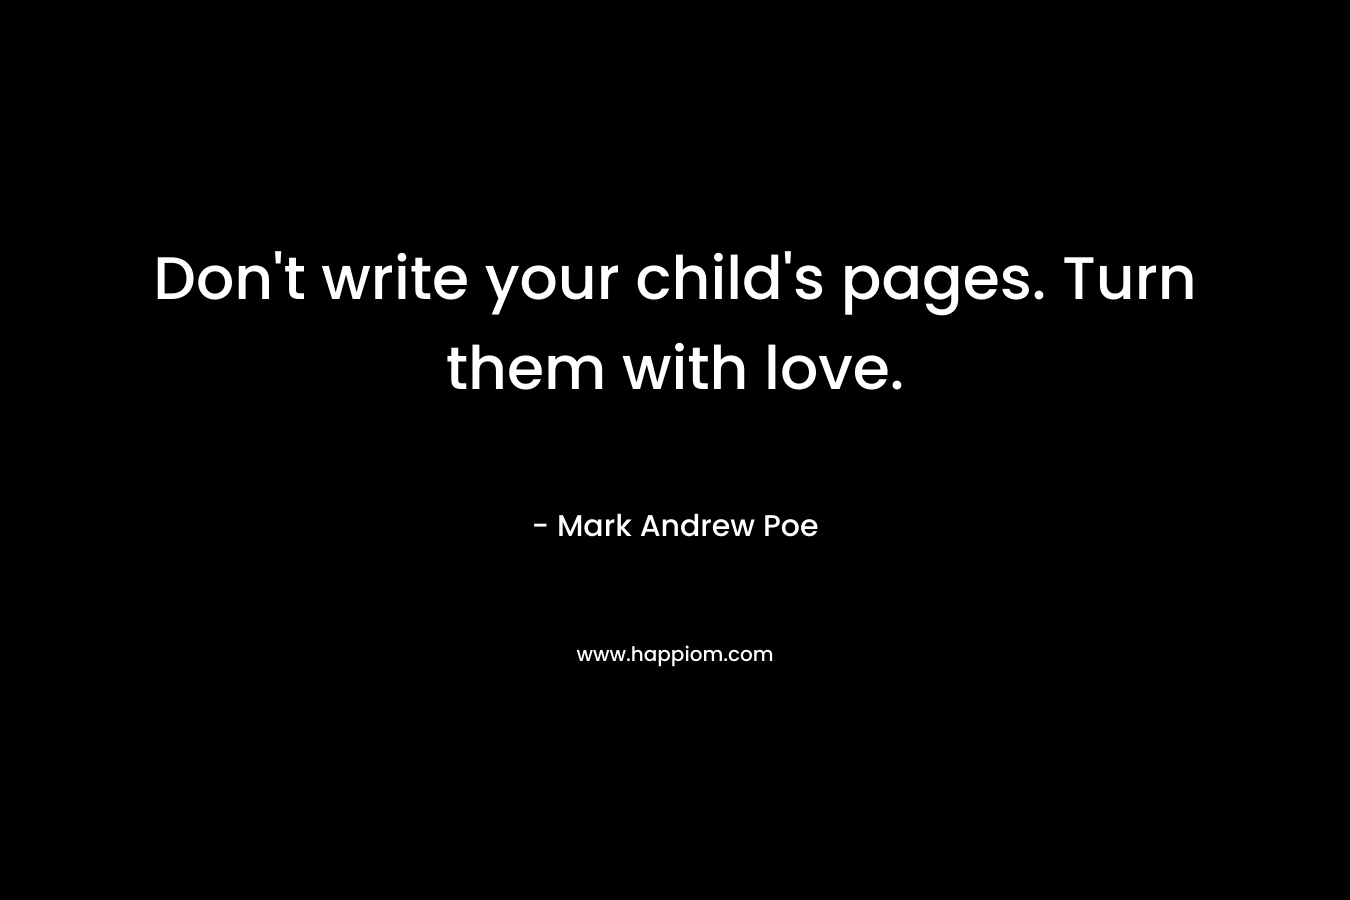 Don’t write your child’s pages. Turn them with love. – Mark Andrew Poe